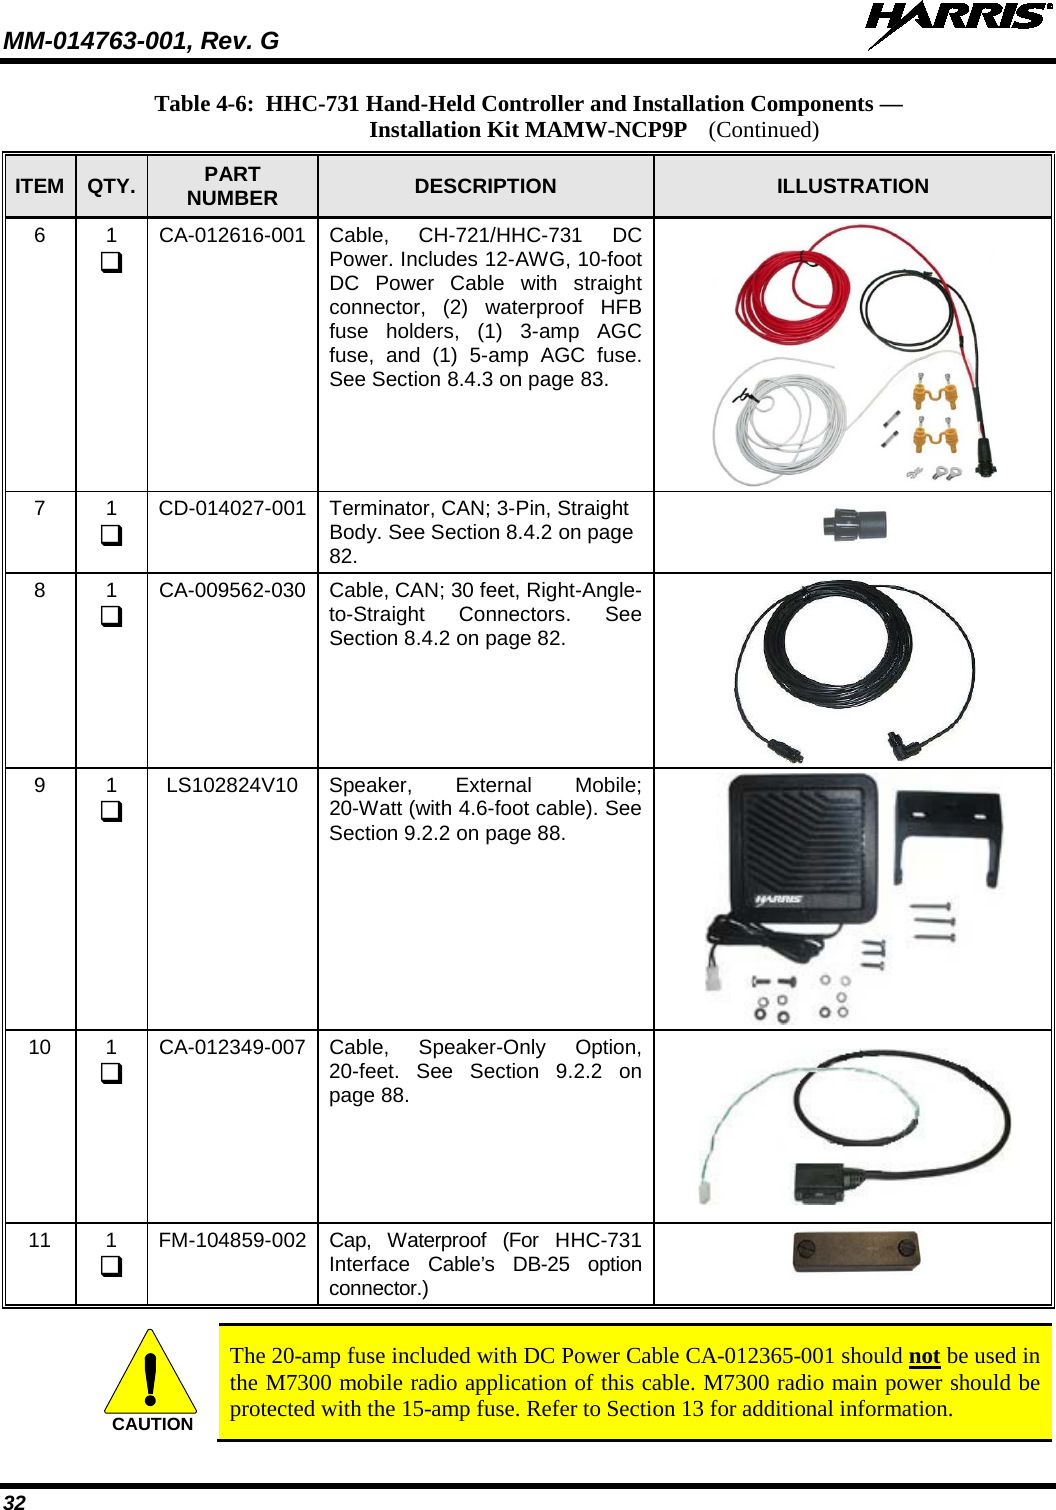 MM-014763-001, Rev. G   32 Table 4-6:  HHC-731 Hand-Held Controller and Installation Components —  Installation Kit MAMW-NCP9P ITEM QTY. PART NUMBER DESCRIPTION ILLUSTRATION 6  1  CA-012616-001 Cable, CH-721/HHC-731 DC Power. Includes 12-AWG, 10-foot DC Power Cable with straight connector, (2) waterproof HFB fuse holders, (1) 3-amp AGC fuse, and (1) 5-amp AGC fuse. See Section 8.4.3 on page 83.  7  1  CD-014027-001 Terminator, CAN; 3-Pin, Straight Body. See Section 8.4.2 on page 82.      8  1  CA-009562-030 Cable, CAN; 30 feet, Right-Angle-to-Straight Connectors. See Section 8.4.2 on page 82.  9  1  LS102824V10  Speaker, External Mobile; 20-Watt (with 4.6-foot cable). See Section 9.2.2 on page 88.  10  1  CA-012349-007 Cable,  Speaker-Only Option, 20-feet.  See Section 9.2.2 on page 88.  11  1  FM-104859-002 Cap, Waterproof (For HHC-731 Interface Cable’s  DB-25  option connector.)     The 20-amp fuse included with DC Power Cable CA-012365-001 should not be used in the M7300 mobile radio application of this cable. M7300 radio main power should be protected with the 15-amp fuse. Refer to Section 13 for additional information.  CAUTION (Continued) 